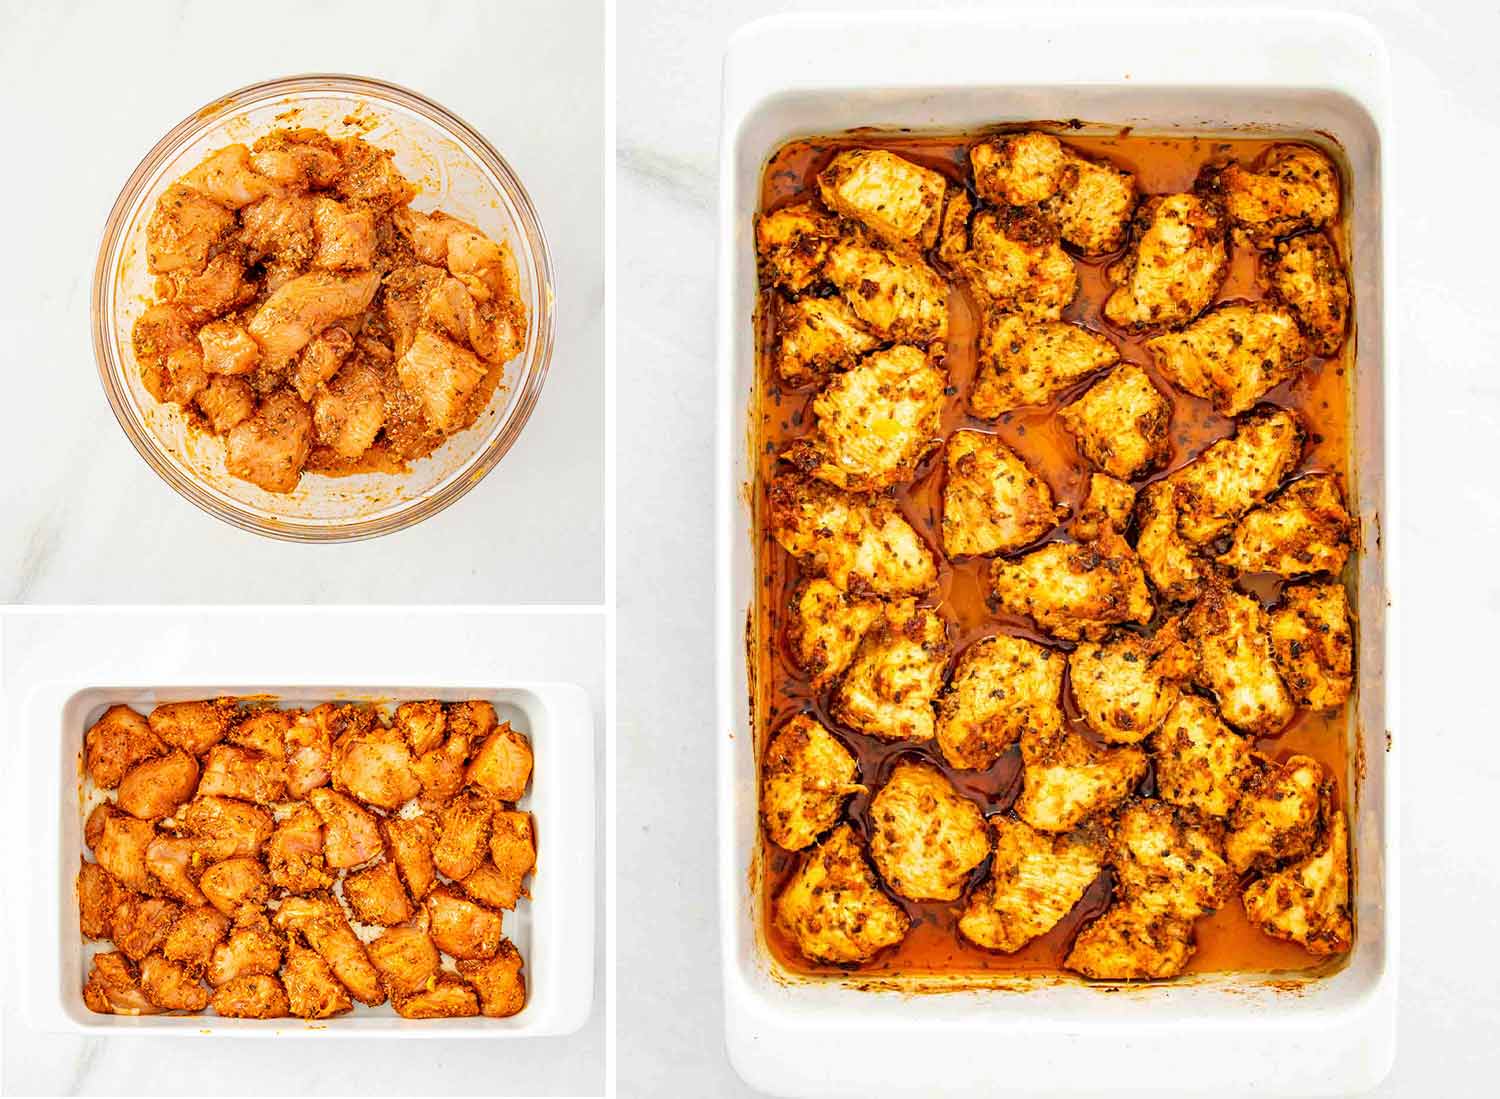 process shots showing how to make oven baked chicken bites.